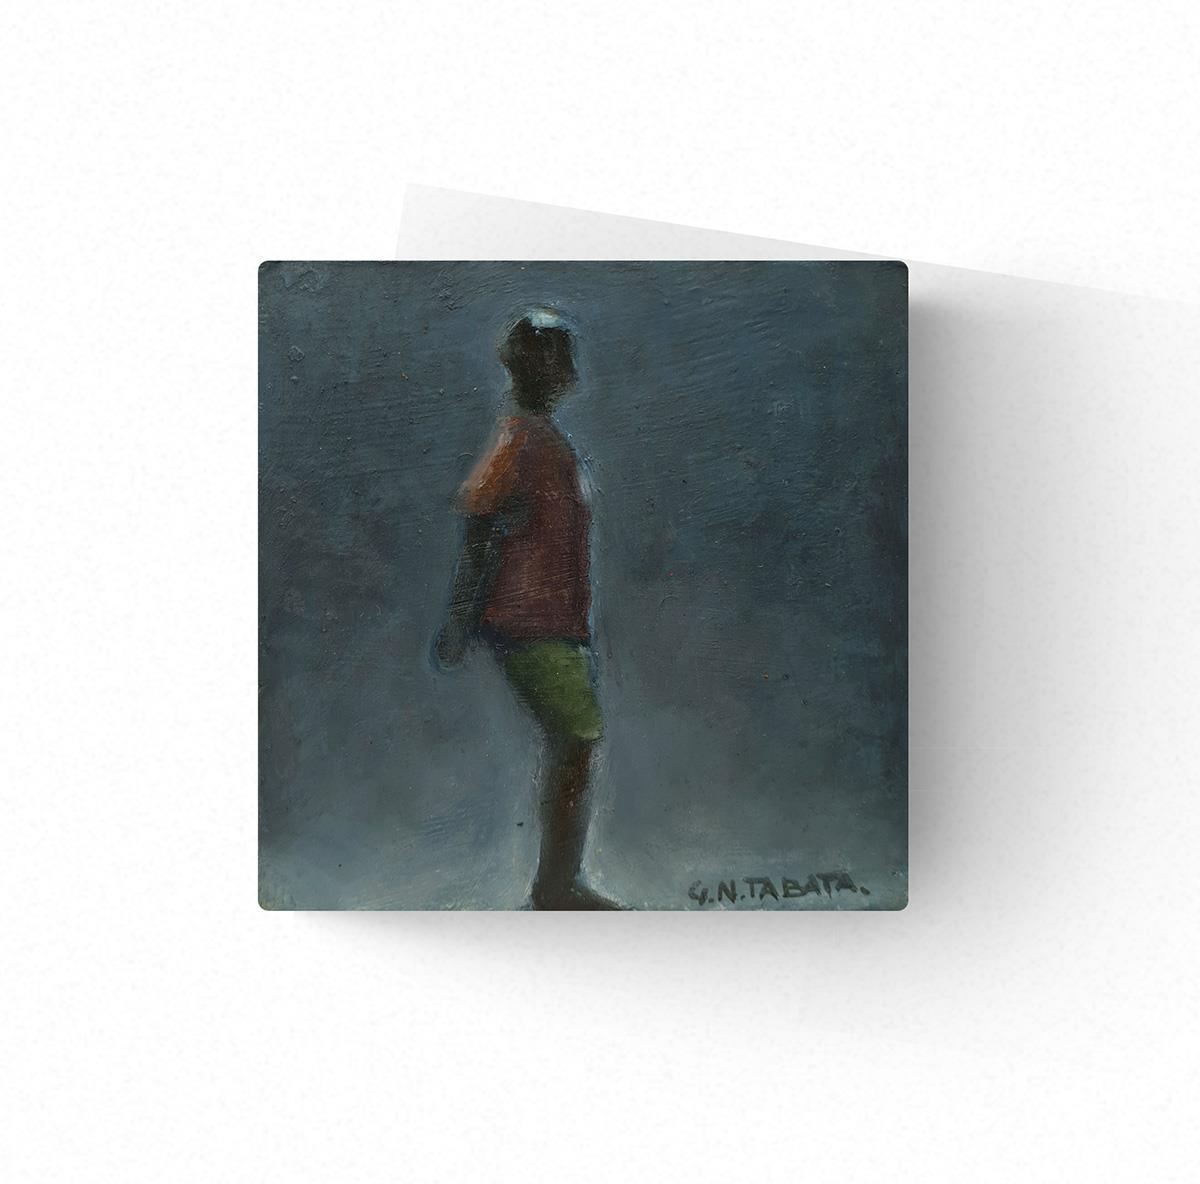 small oil painting of an African man in red shirt & green shorts